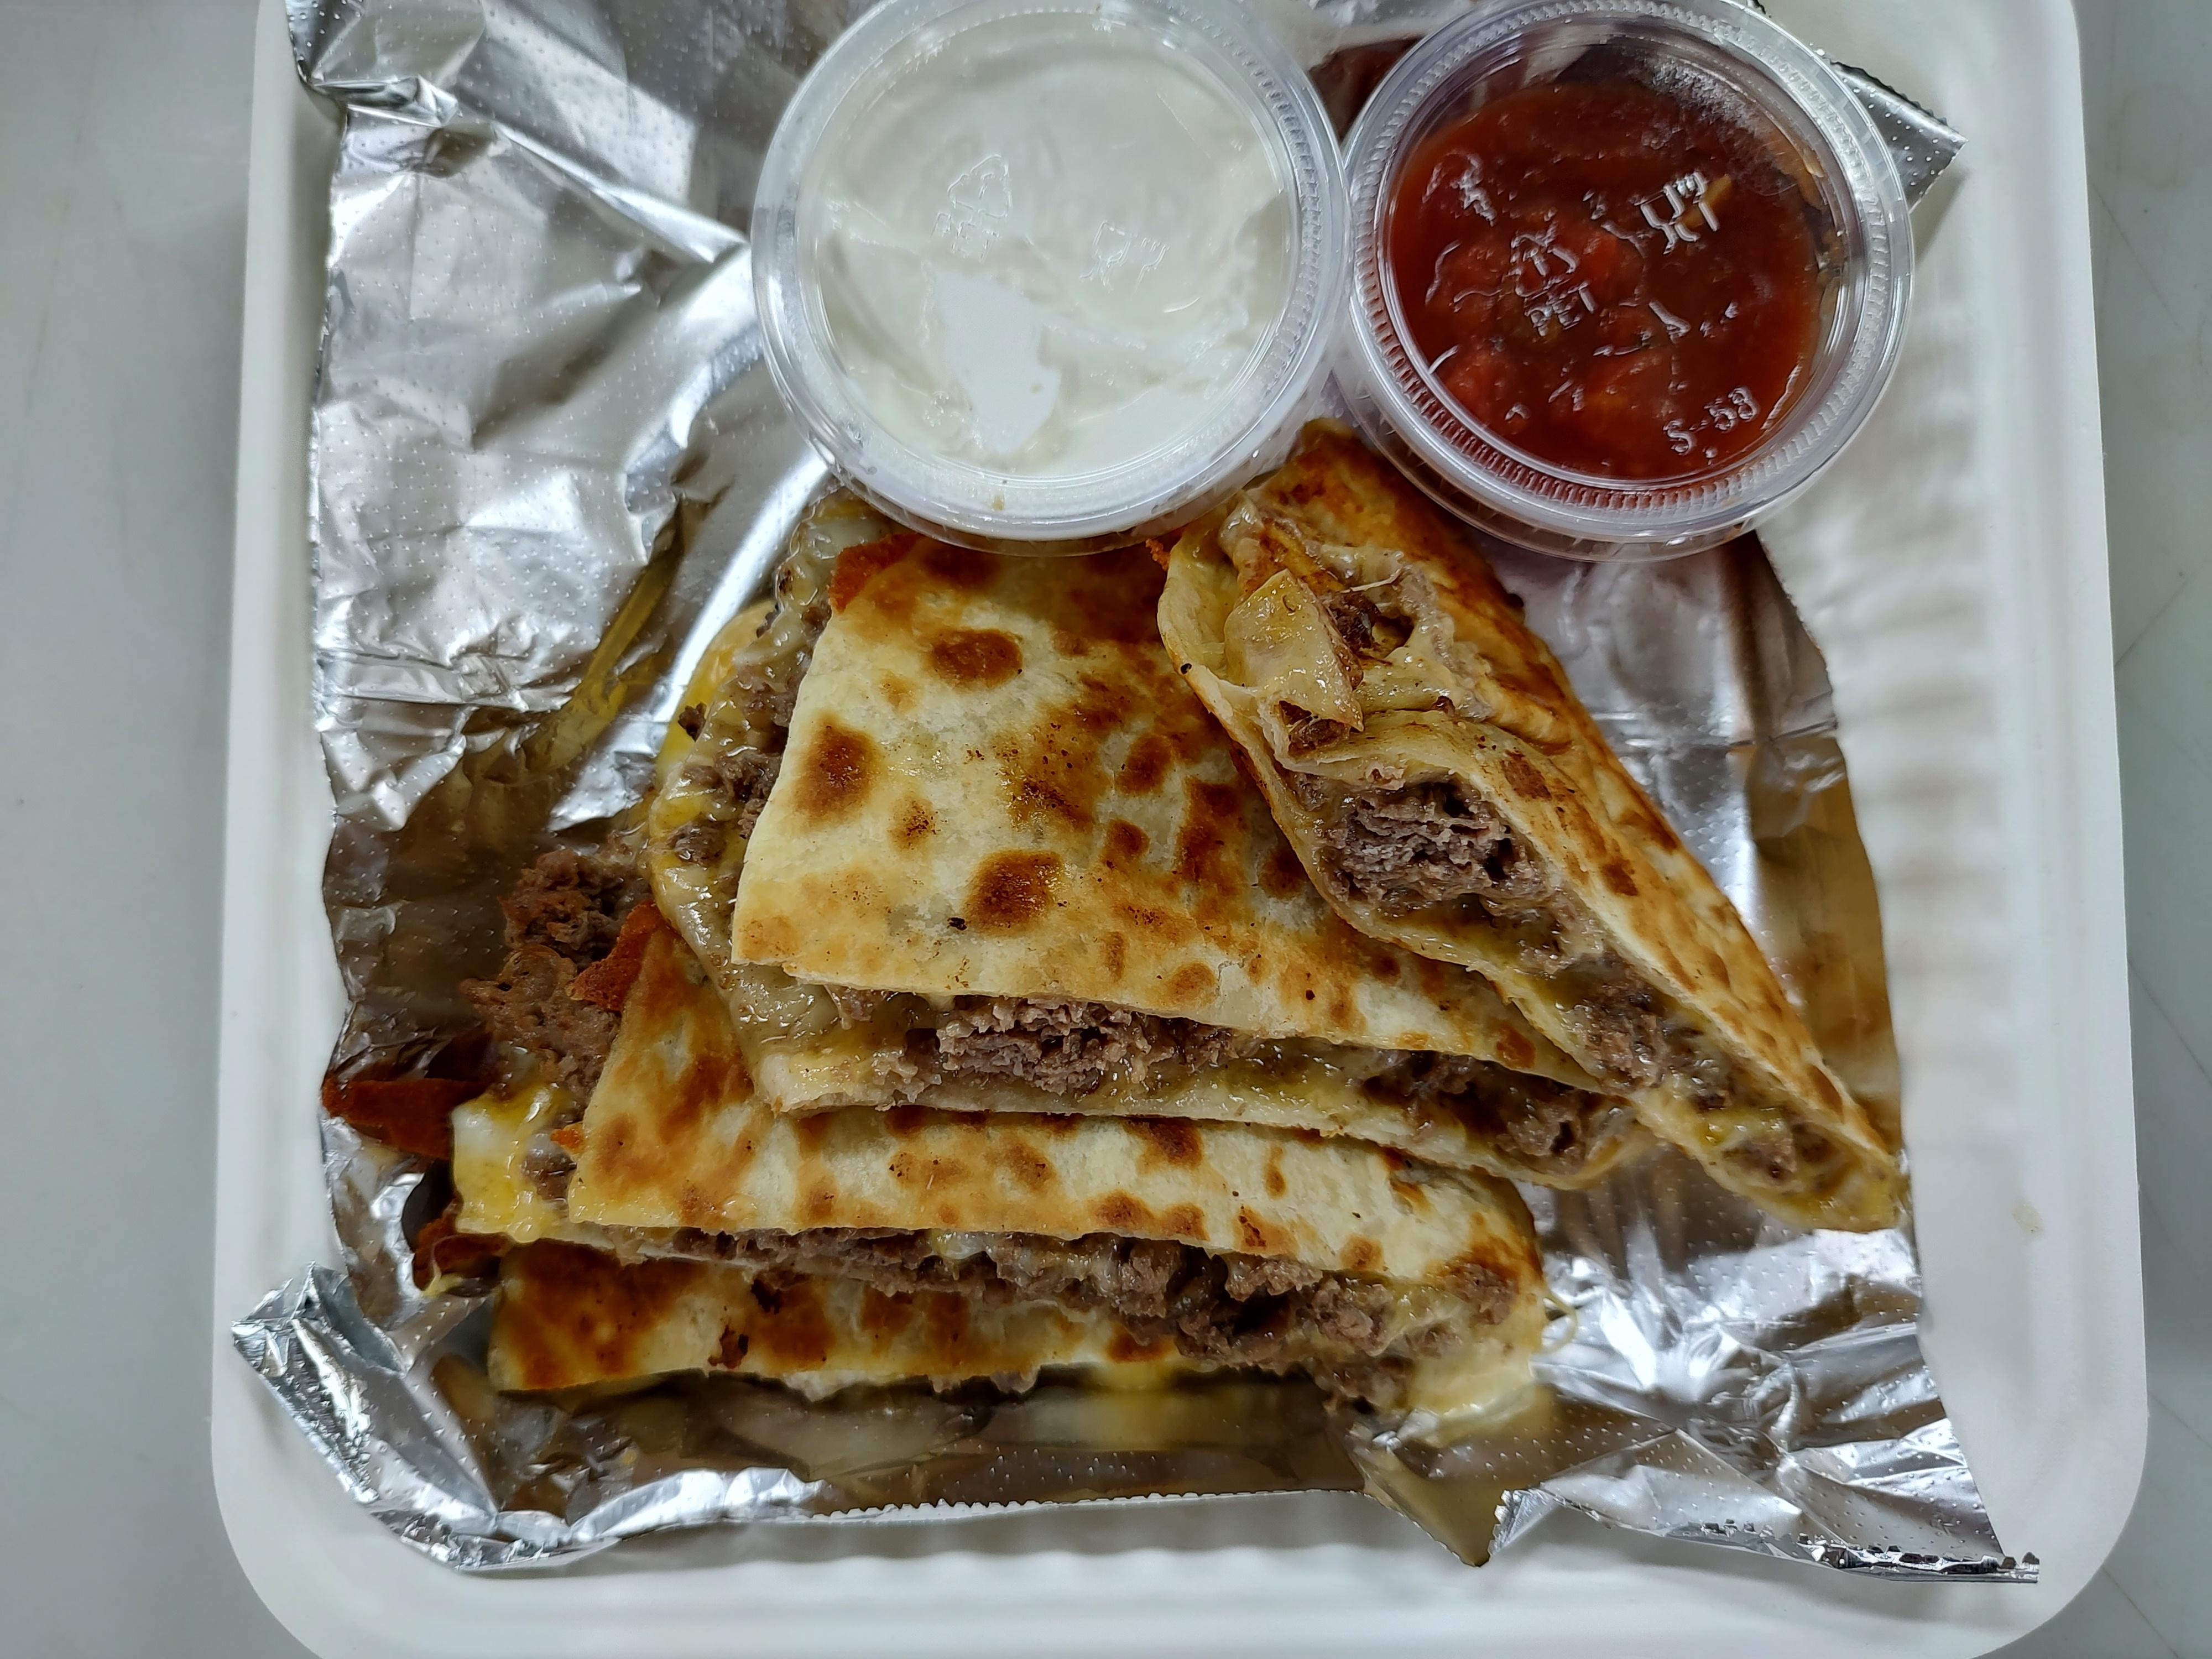 Grilled Steak and Cheese Quesadilla